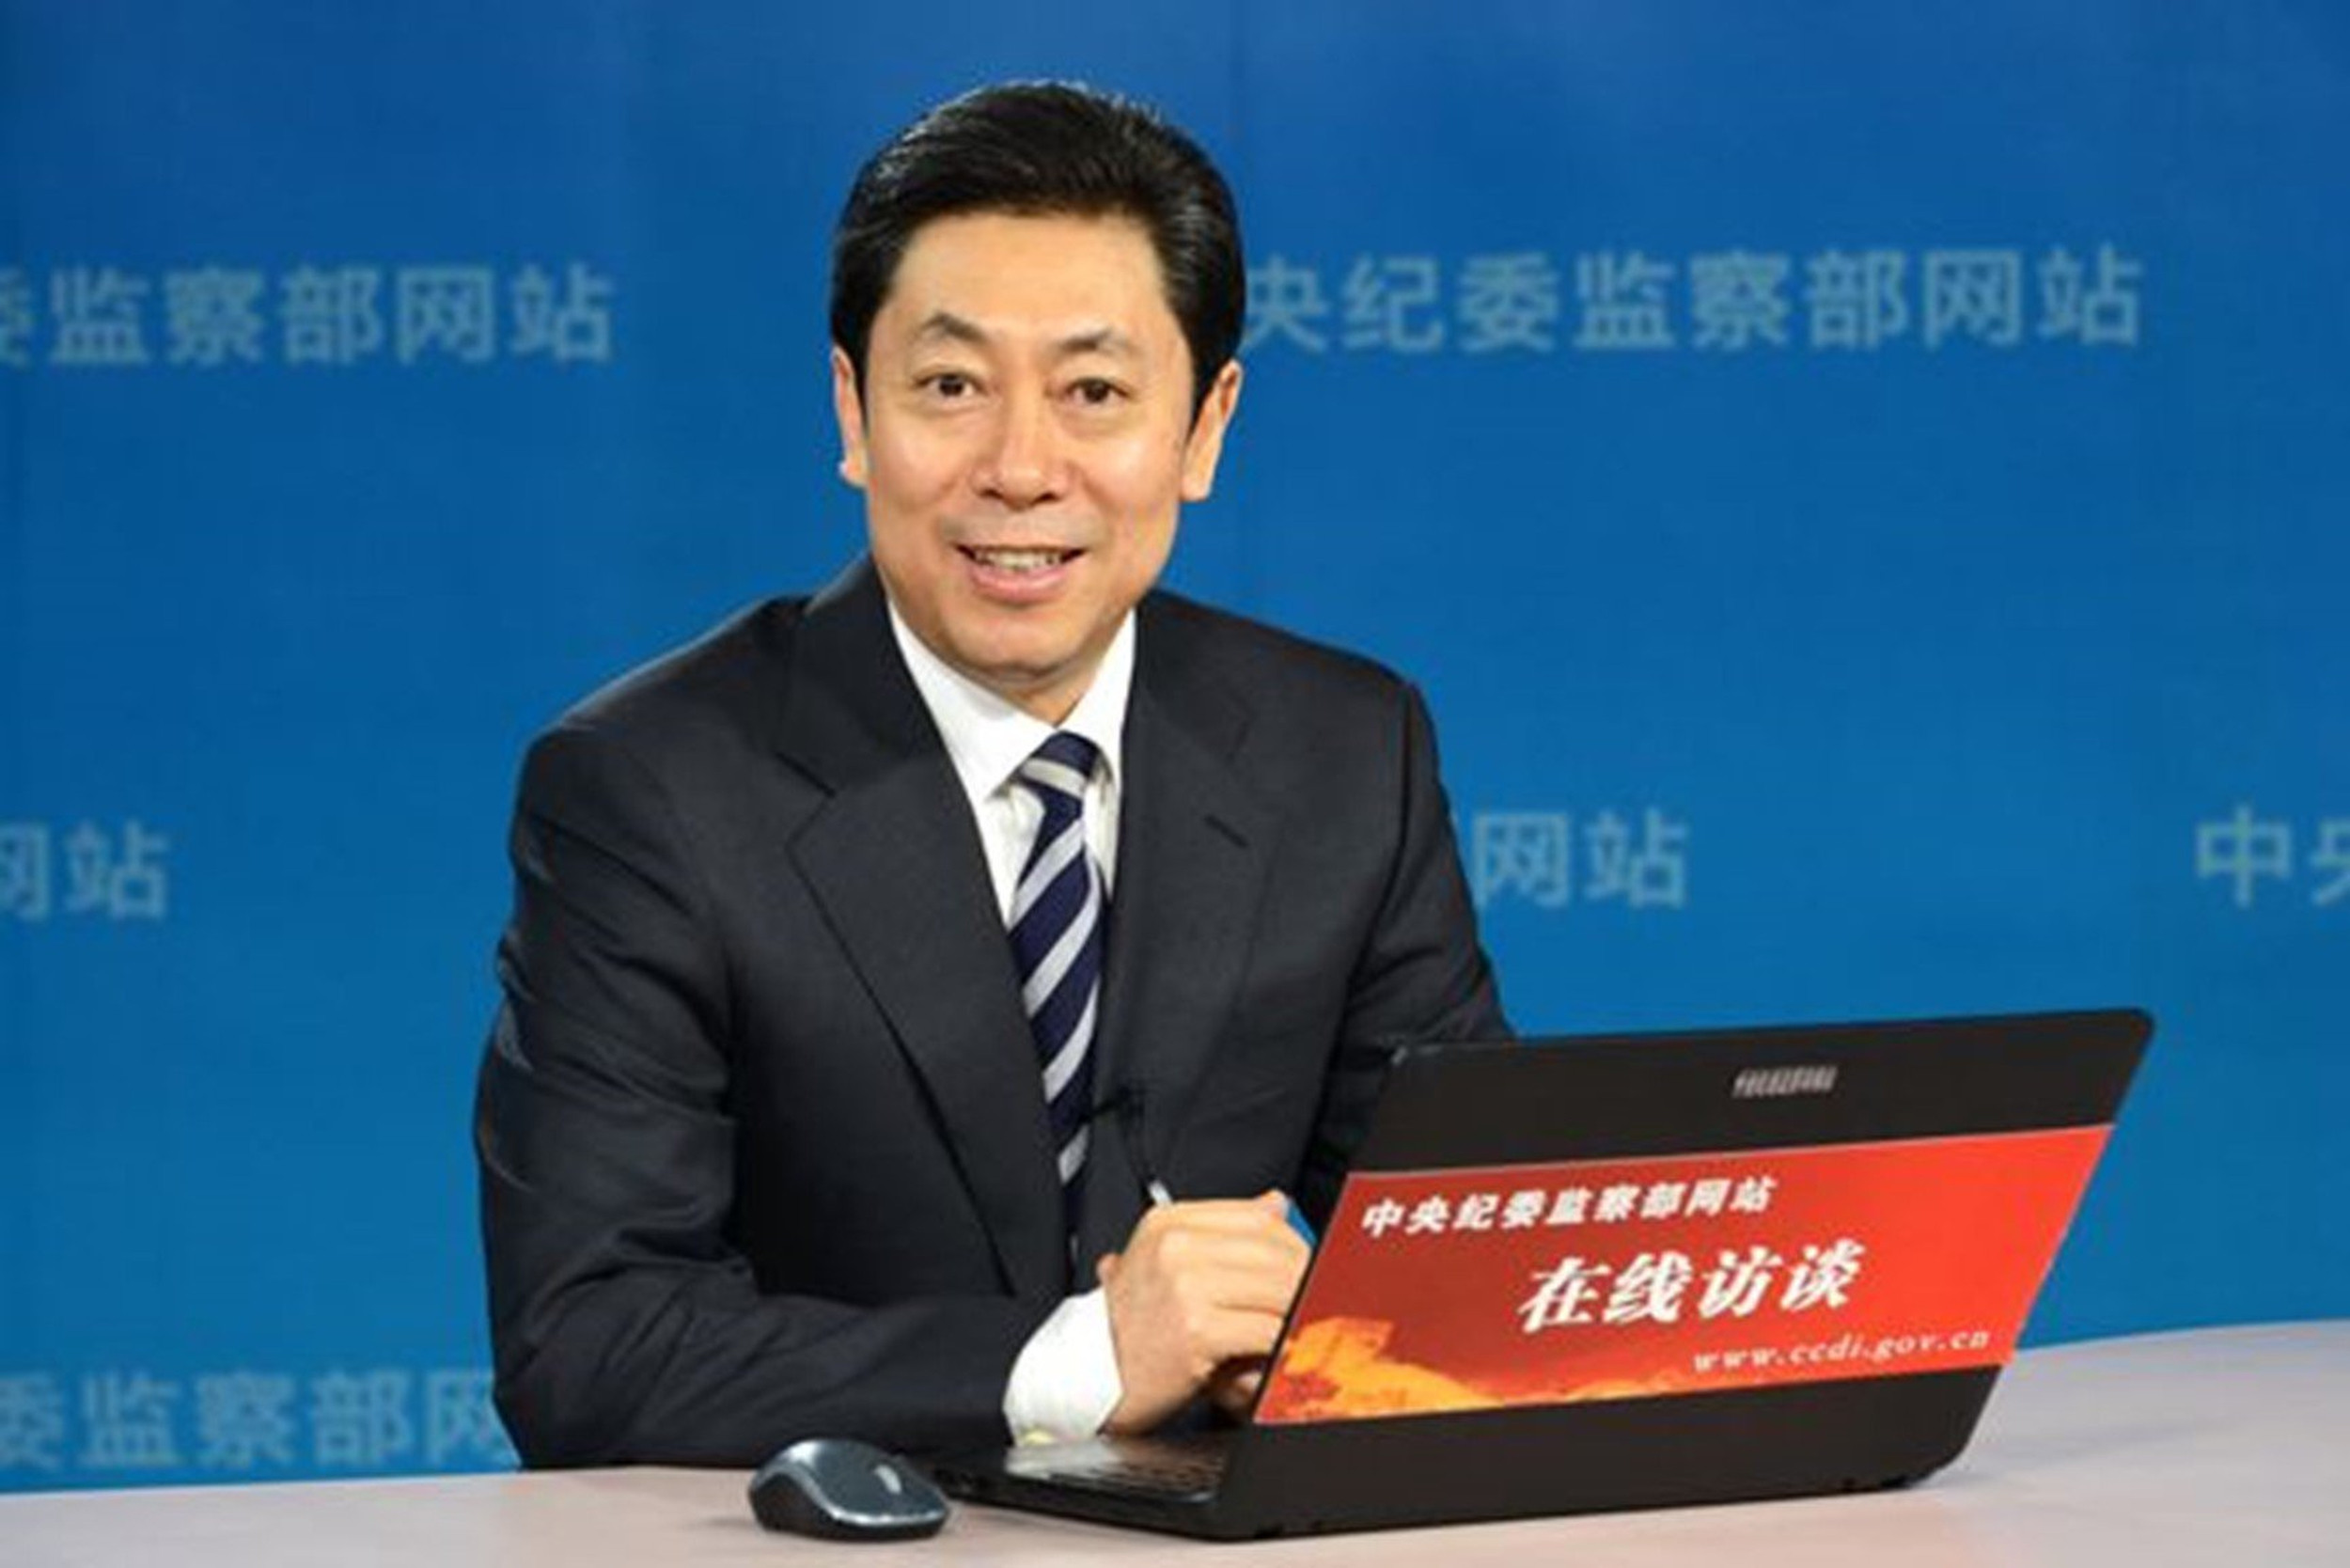 Chen Wenqing, China’s top security official. Photo: CCTV